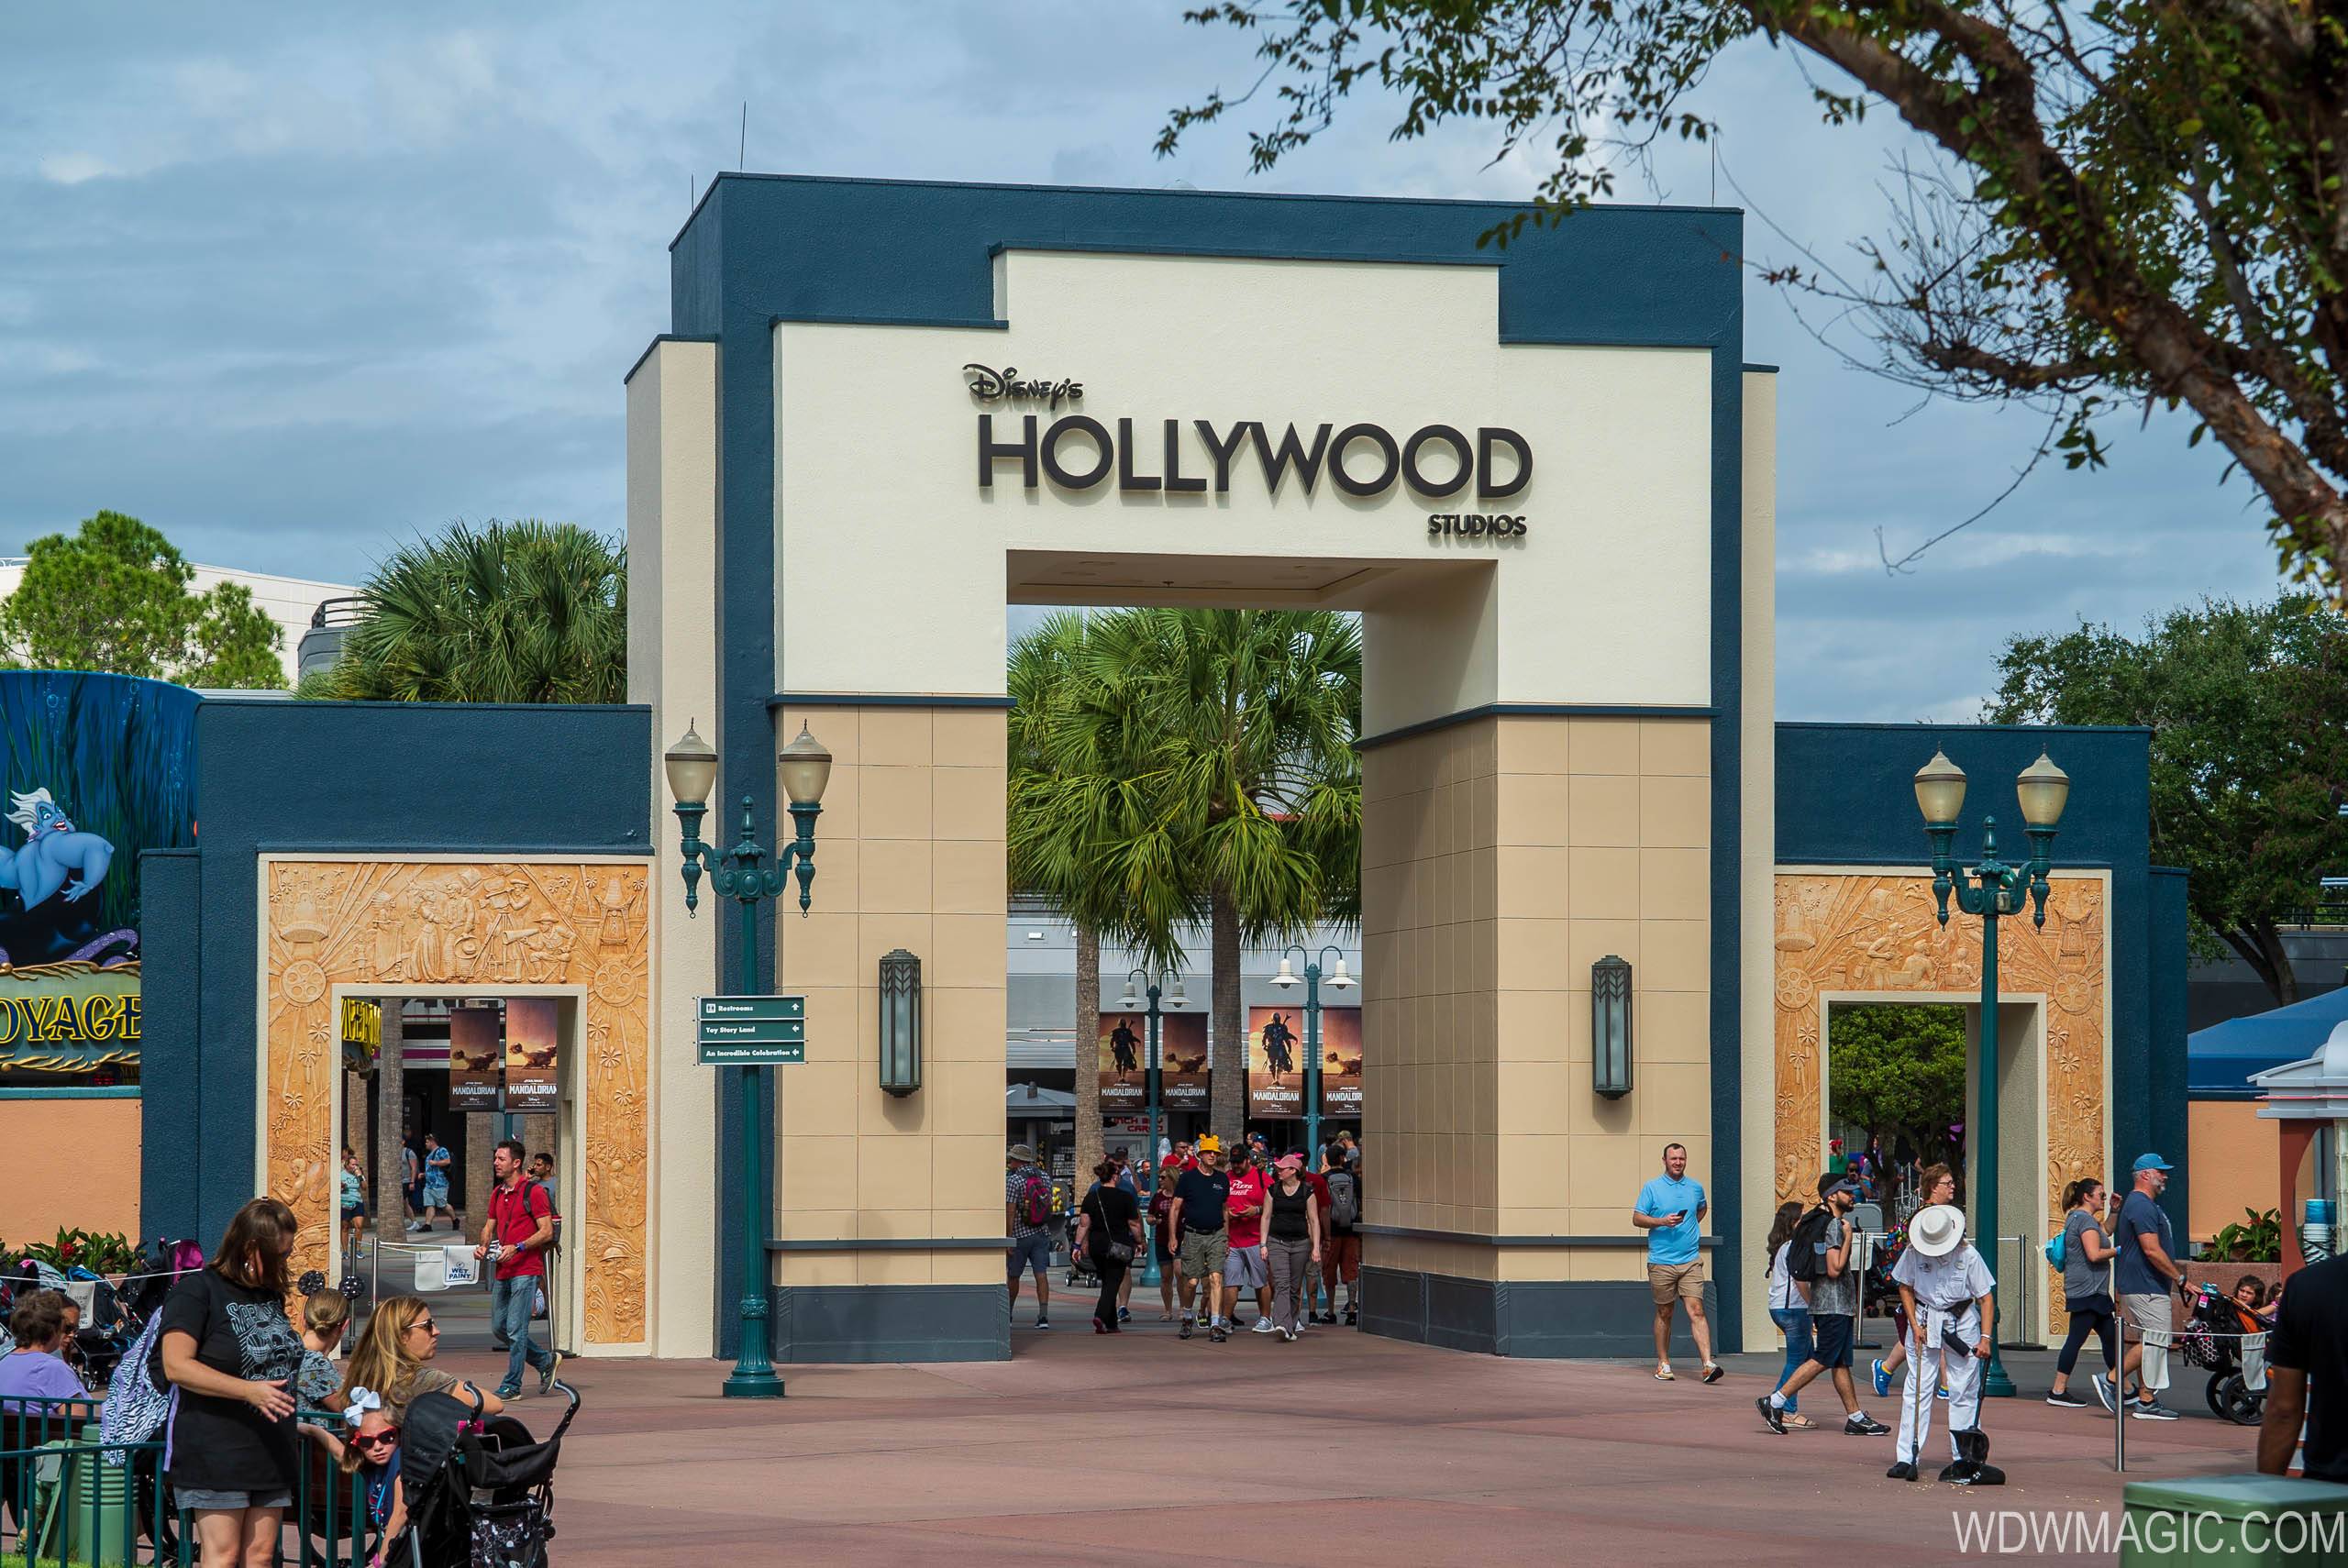 Disney's Hollywood Studios will reopen on July 15 with its new line-up of attractions